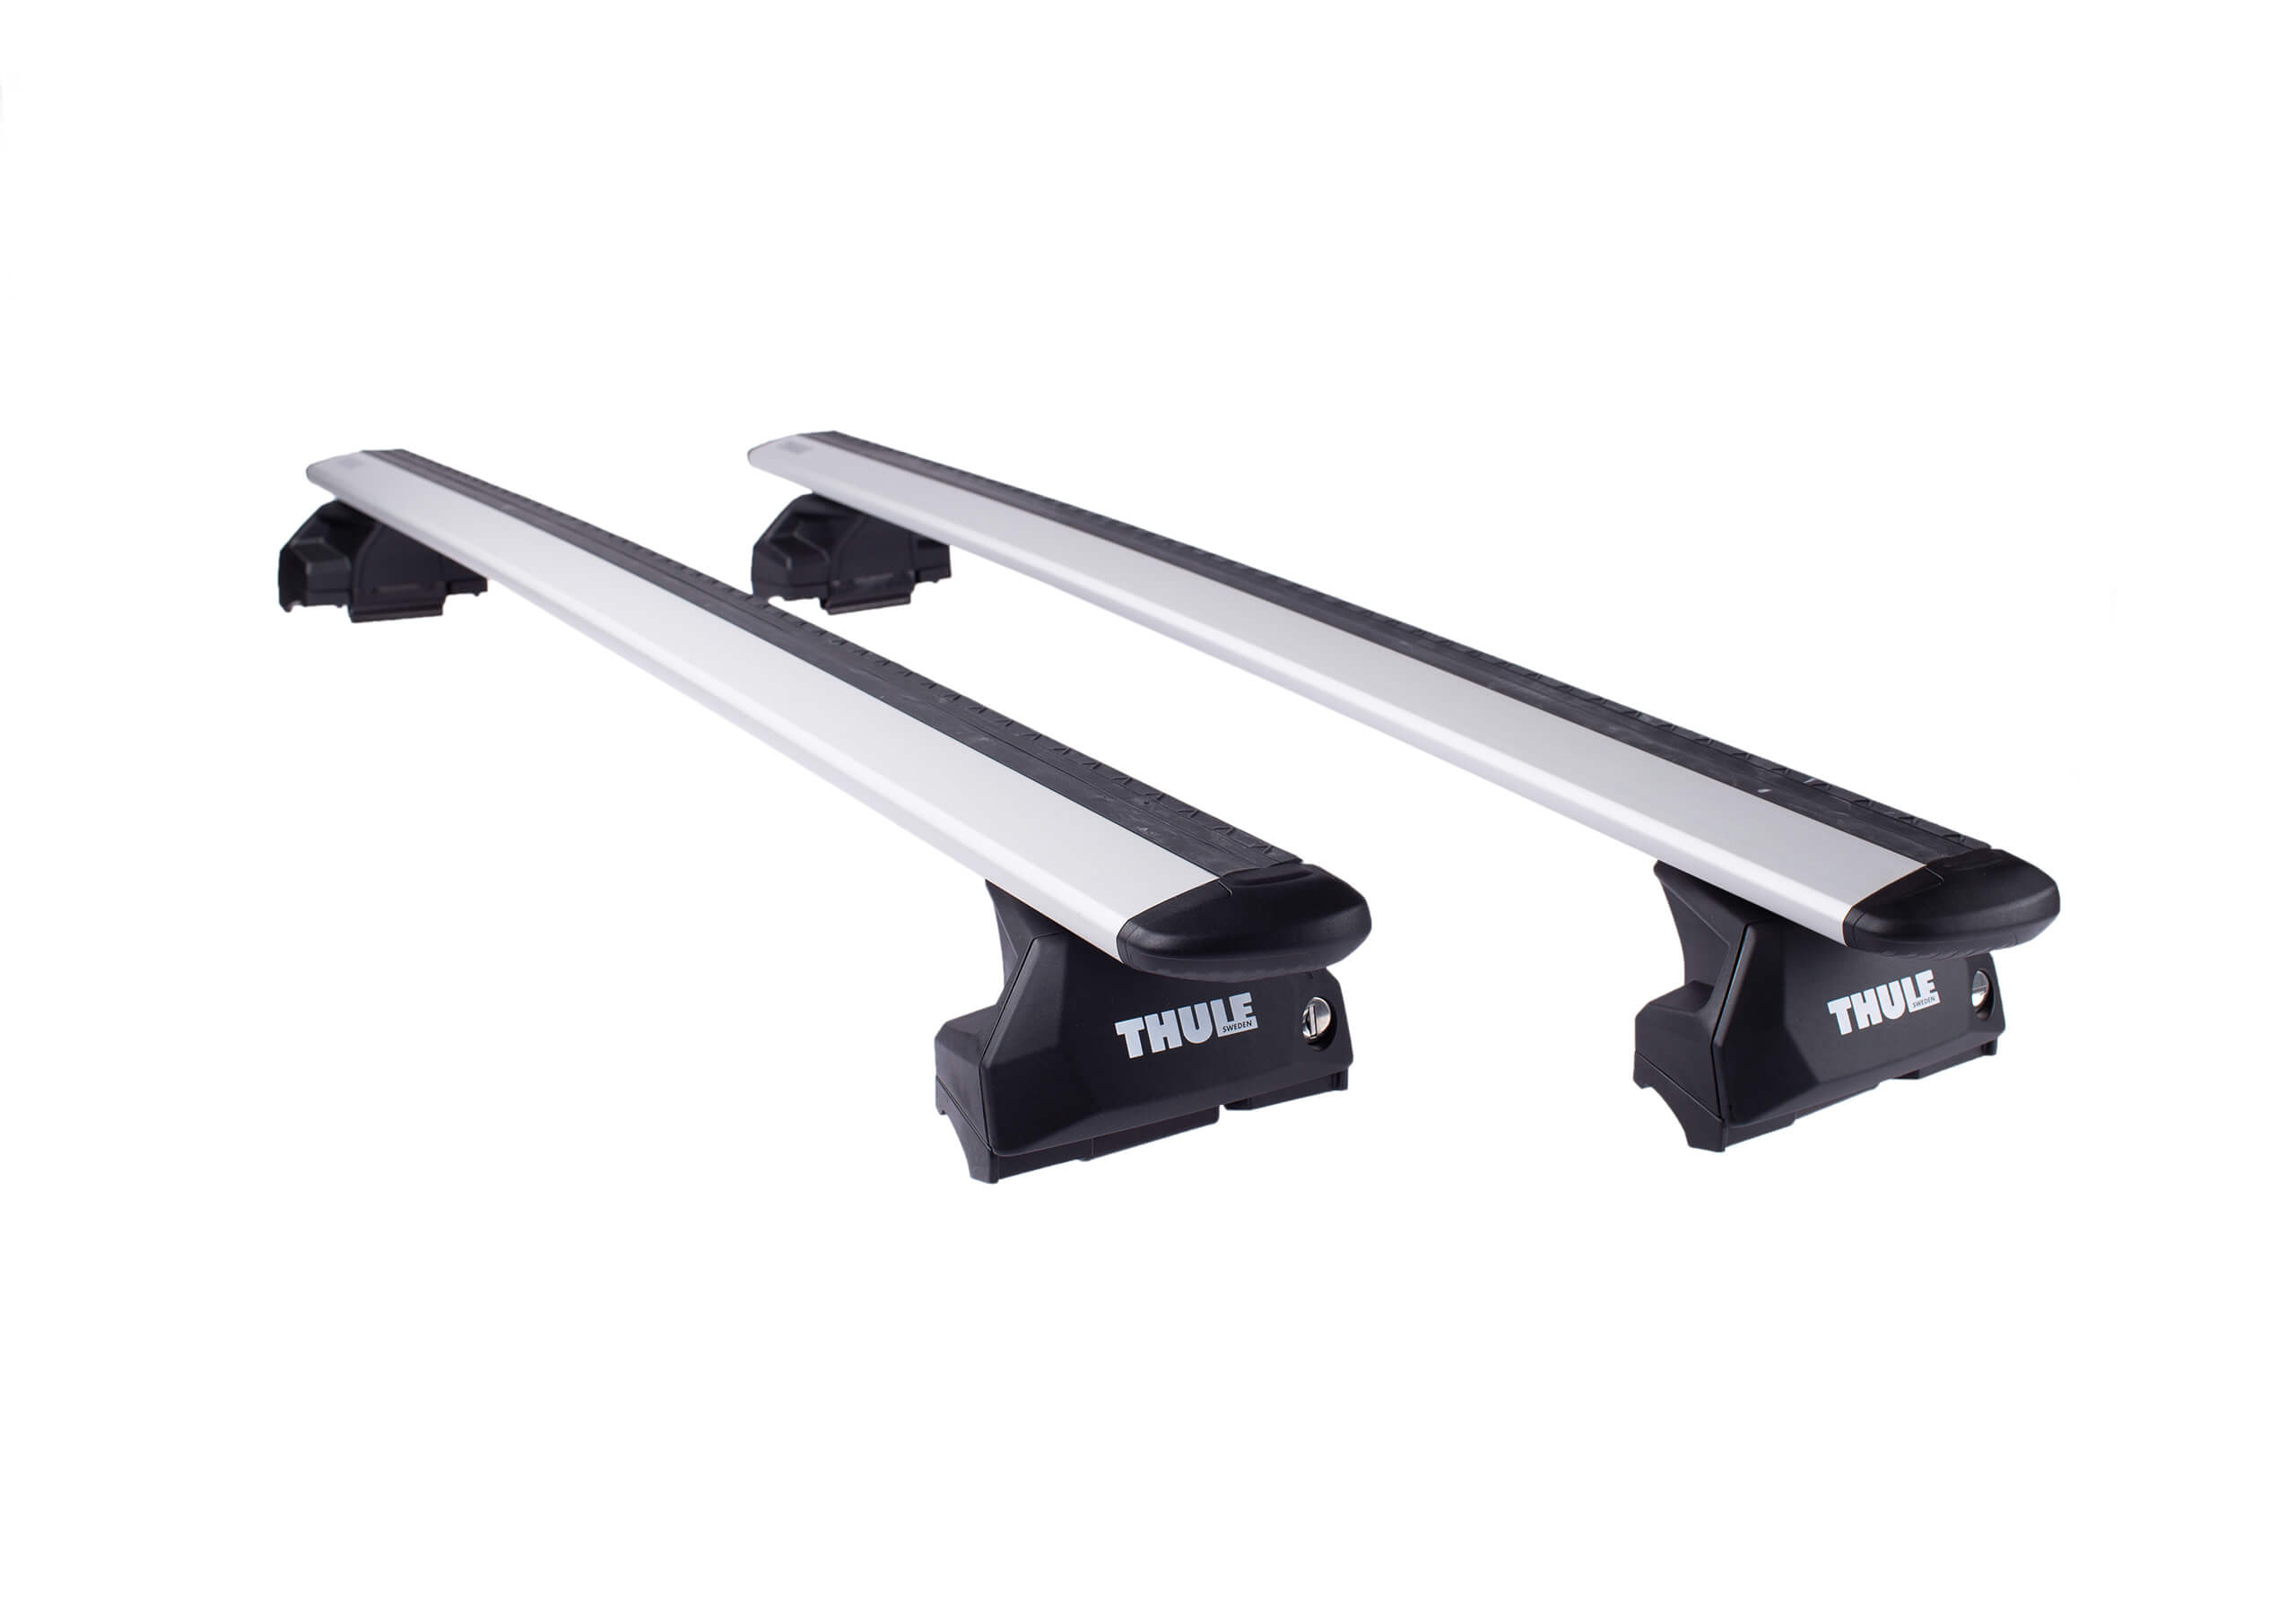 Ford Mondeo estate (2007 to 2014):Thule silver Evo WingBars package - 7106, 7112, 6022